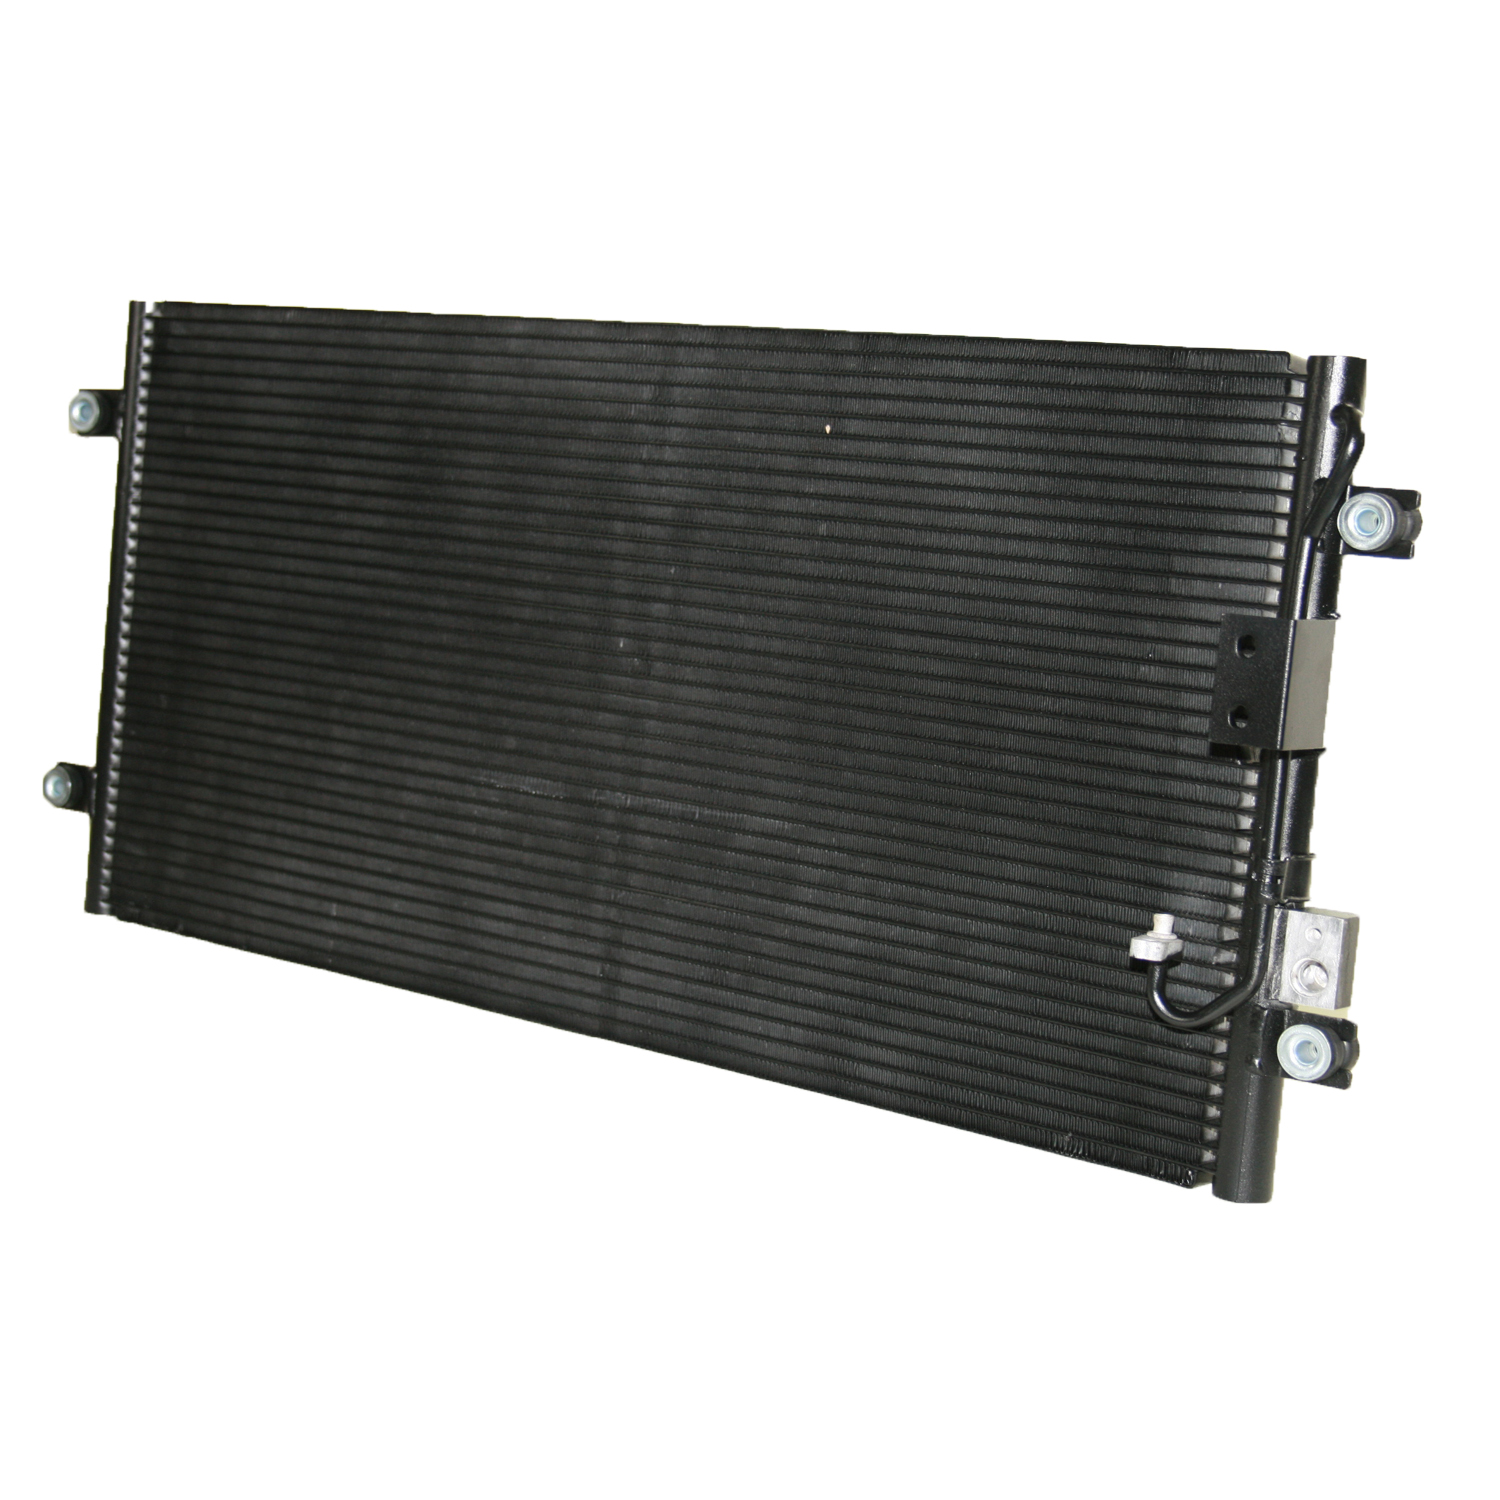 TCW Condenser 44-3063 New Product Image field_60b6a13a6e67c